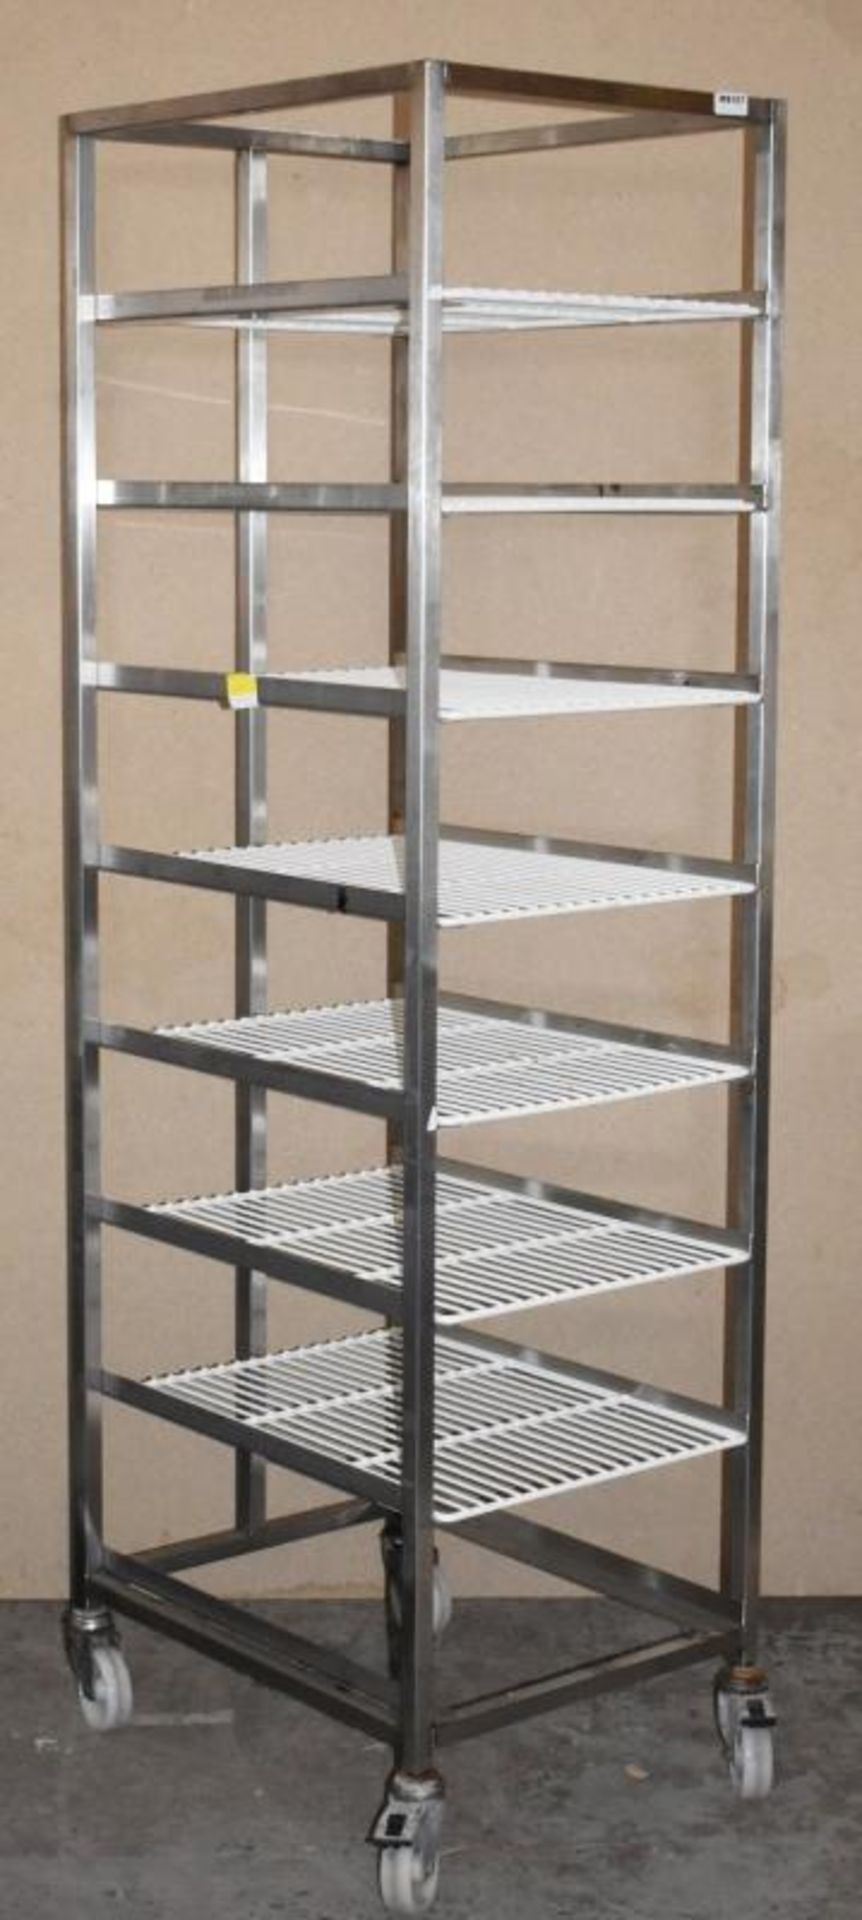 1 x Stainless Steel 8 Tier Mobile Shelf Unit For Commercial Kitchens With White Coated Wire Shelves